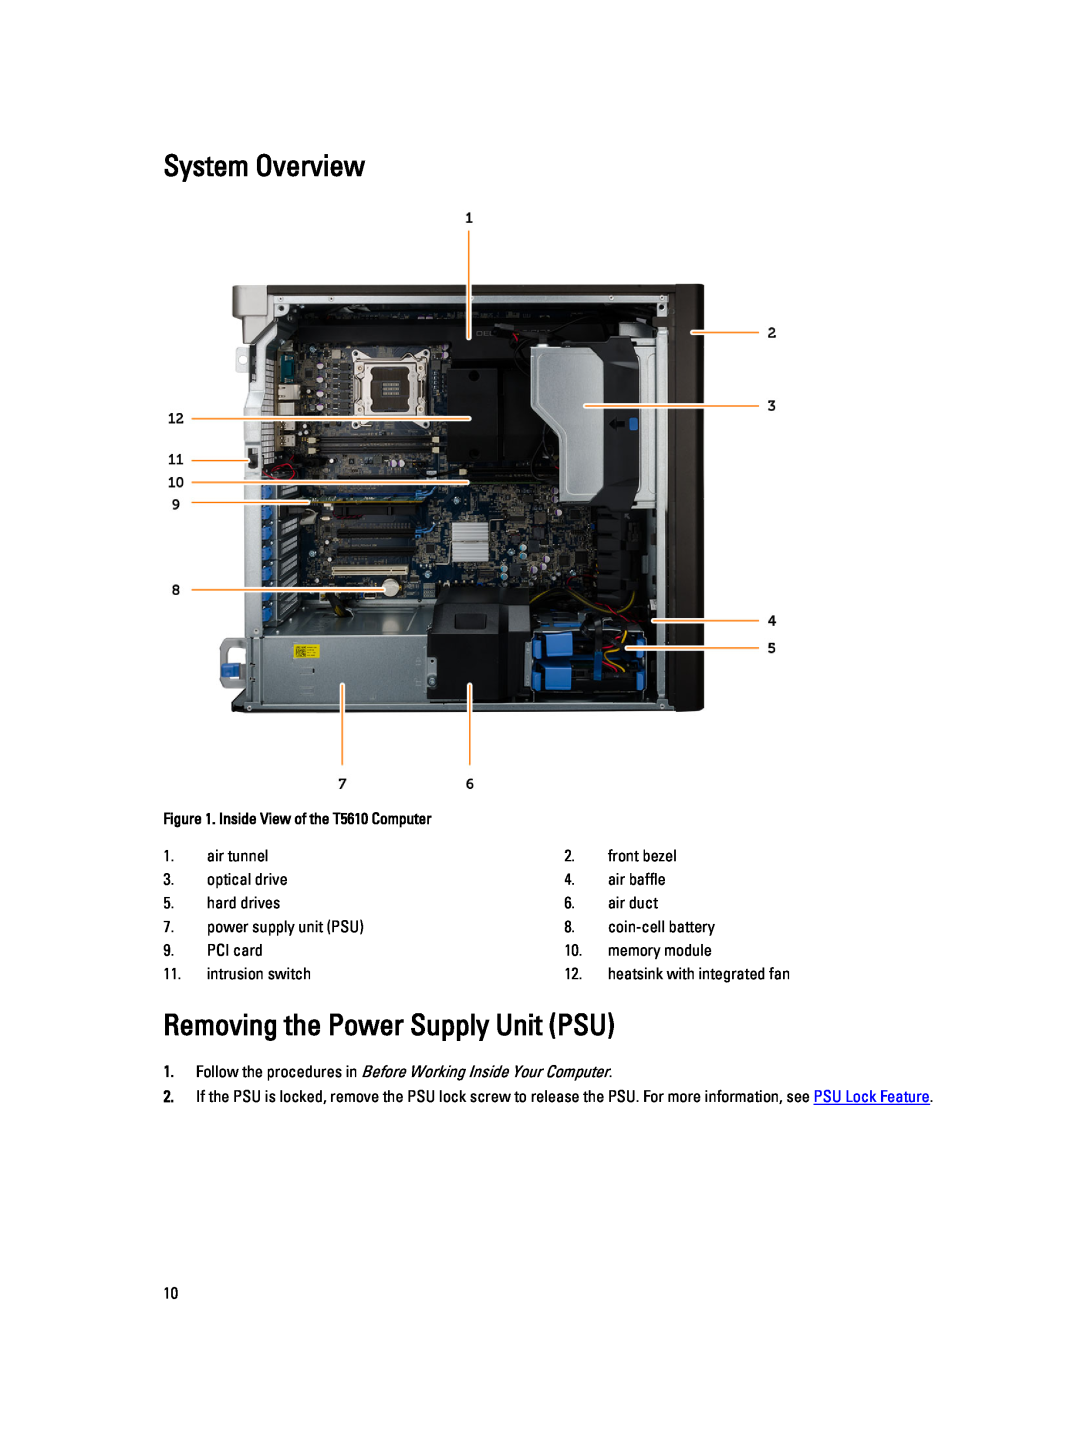 Dell T5610 owner manual System Overview, Removing the Power Supply Unit PSU 